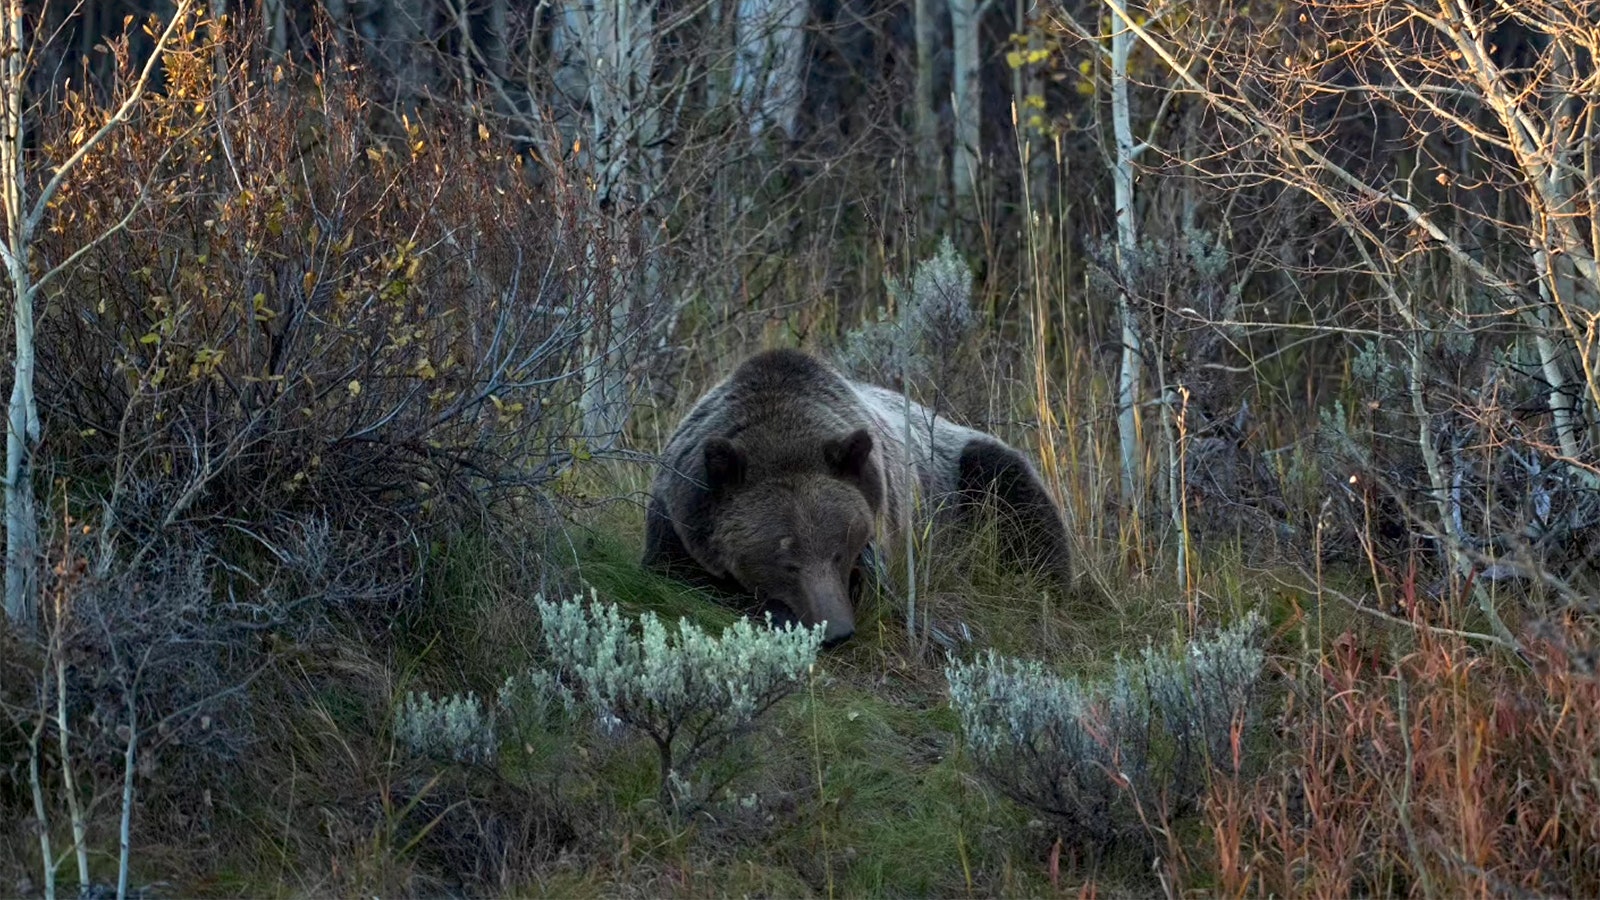 After being struck by a vehicle Monday afternoon along U.S. Highway 89 in Teton National Park, Wyoming’s beloved Grizzly 610 laid still for hours before finally rejoining her three yearling cubs. She was reported to be up and moving normally early Tuesday.